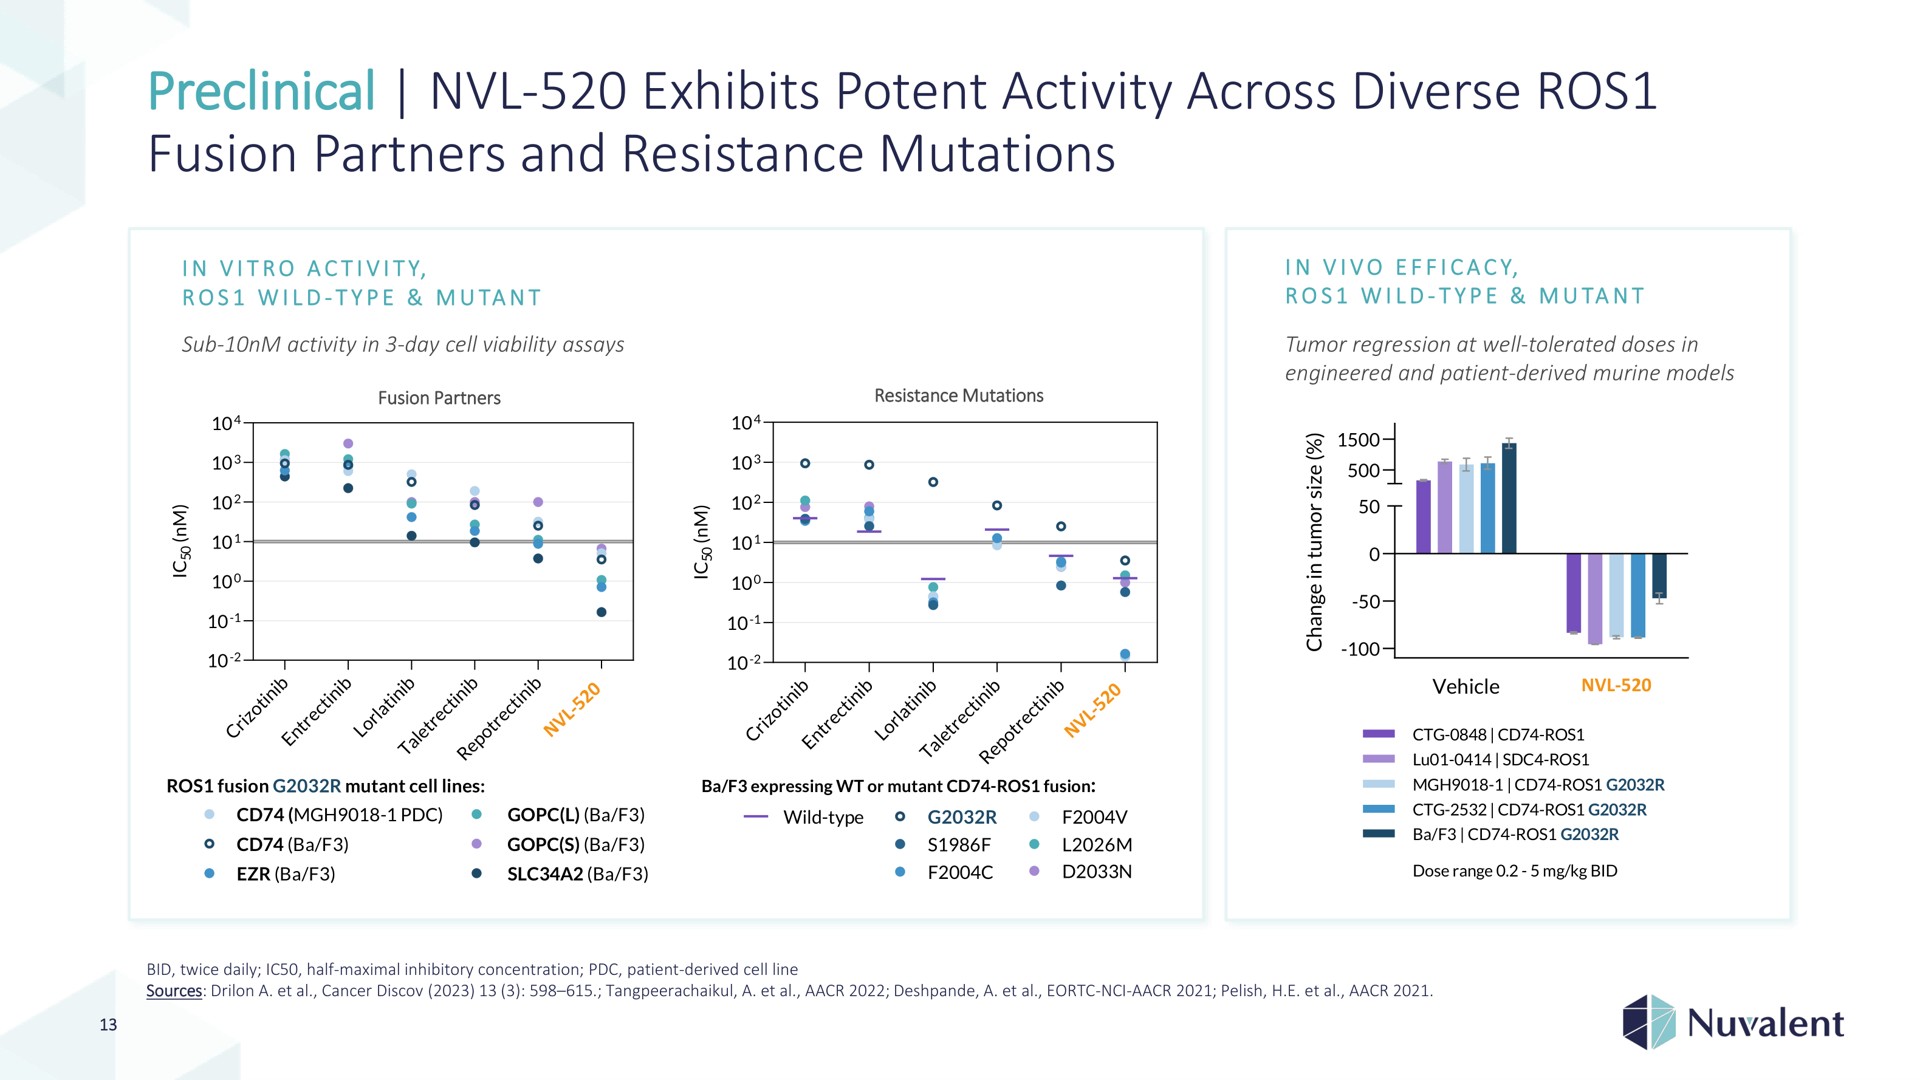 preclinical exhibits potent activity across diverse fusion partners and resistance mutations | Nuvalent